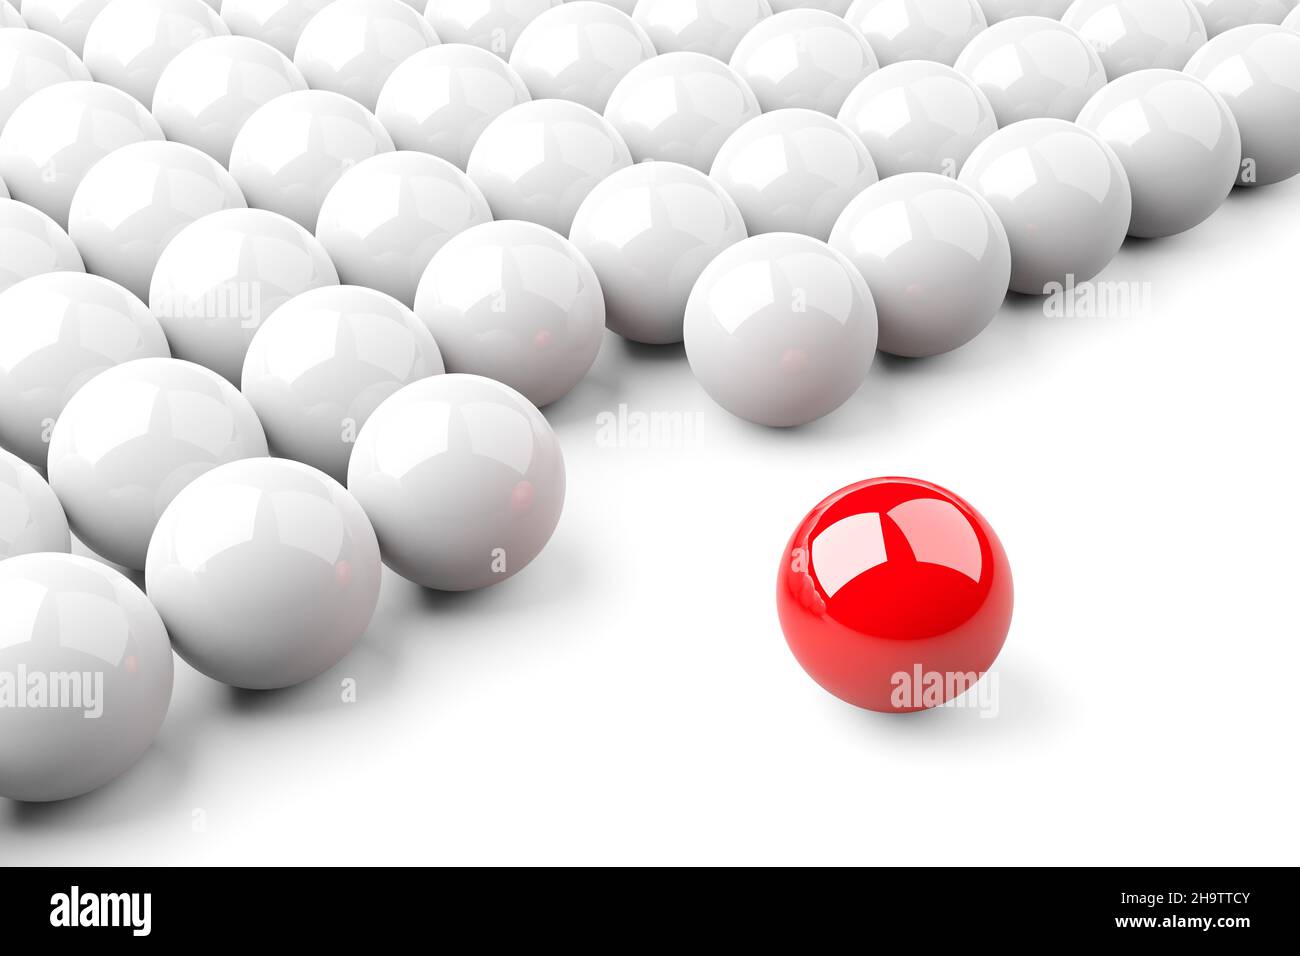 Single red ball standing out from the crowd of shiny white spheres, leadership, standing out or bravery concept over white background, 3D illustration Stock Photo